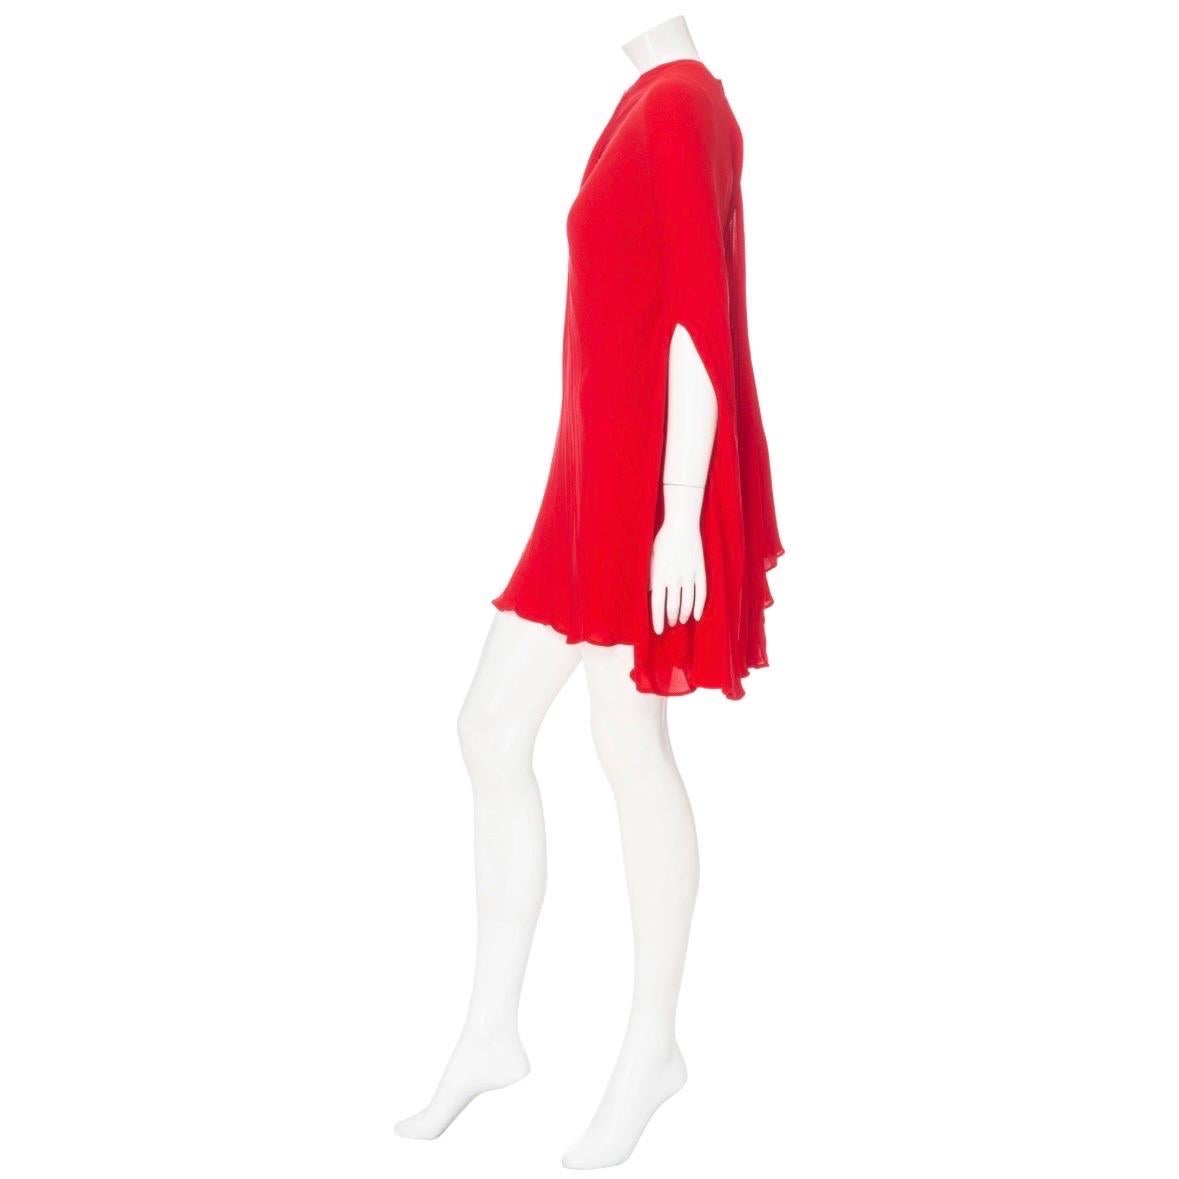 Valentino Garavani Red Silk-Georgette Cape-Effect Bodysuit Mini Dress 

Spring 2023 Ready-to-Wear
Bright Red
Pleated
Asymmetrical cape design
High round neckline
Bodysuit lining
Button fastening at neck
Mini, thigh length
Tent silhouette
Made in